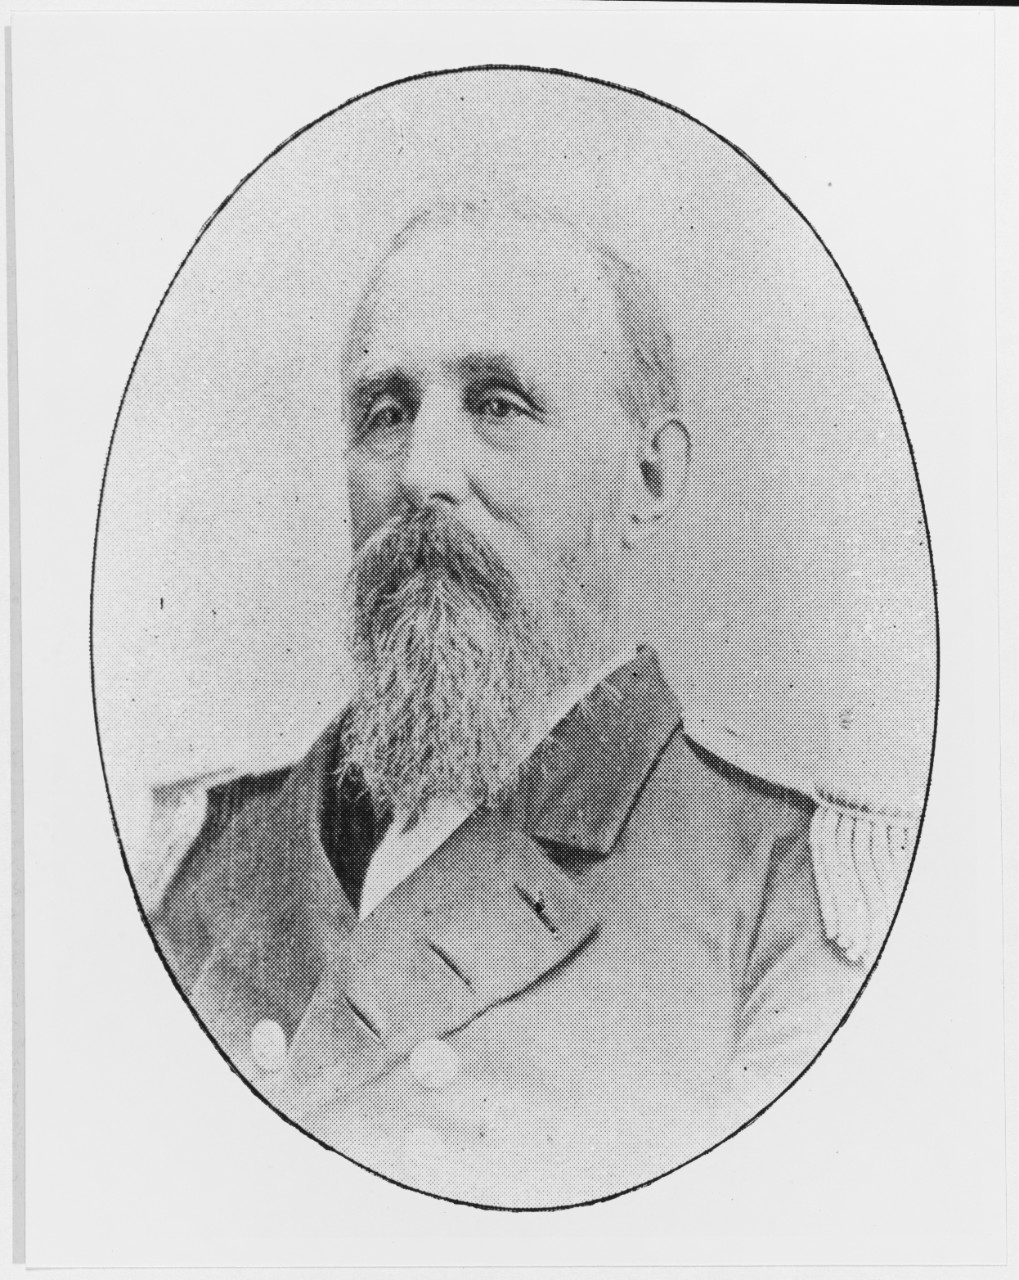 Rear Admiral Thomas Stowell Phelps, USN (1822-1901)